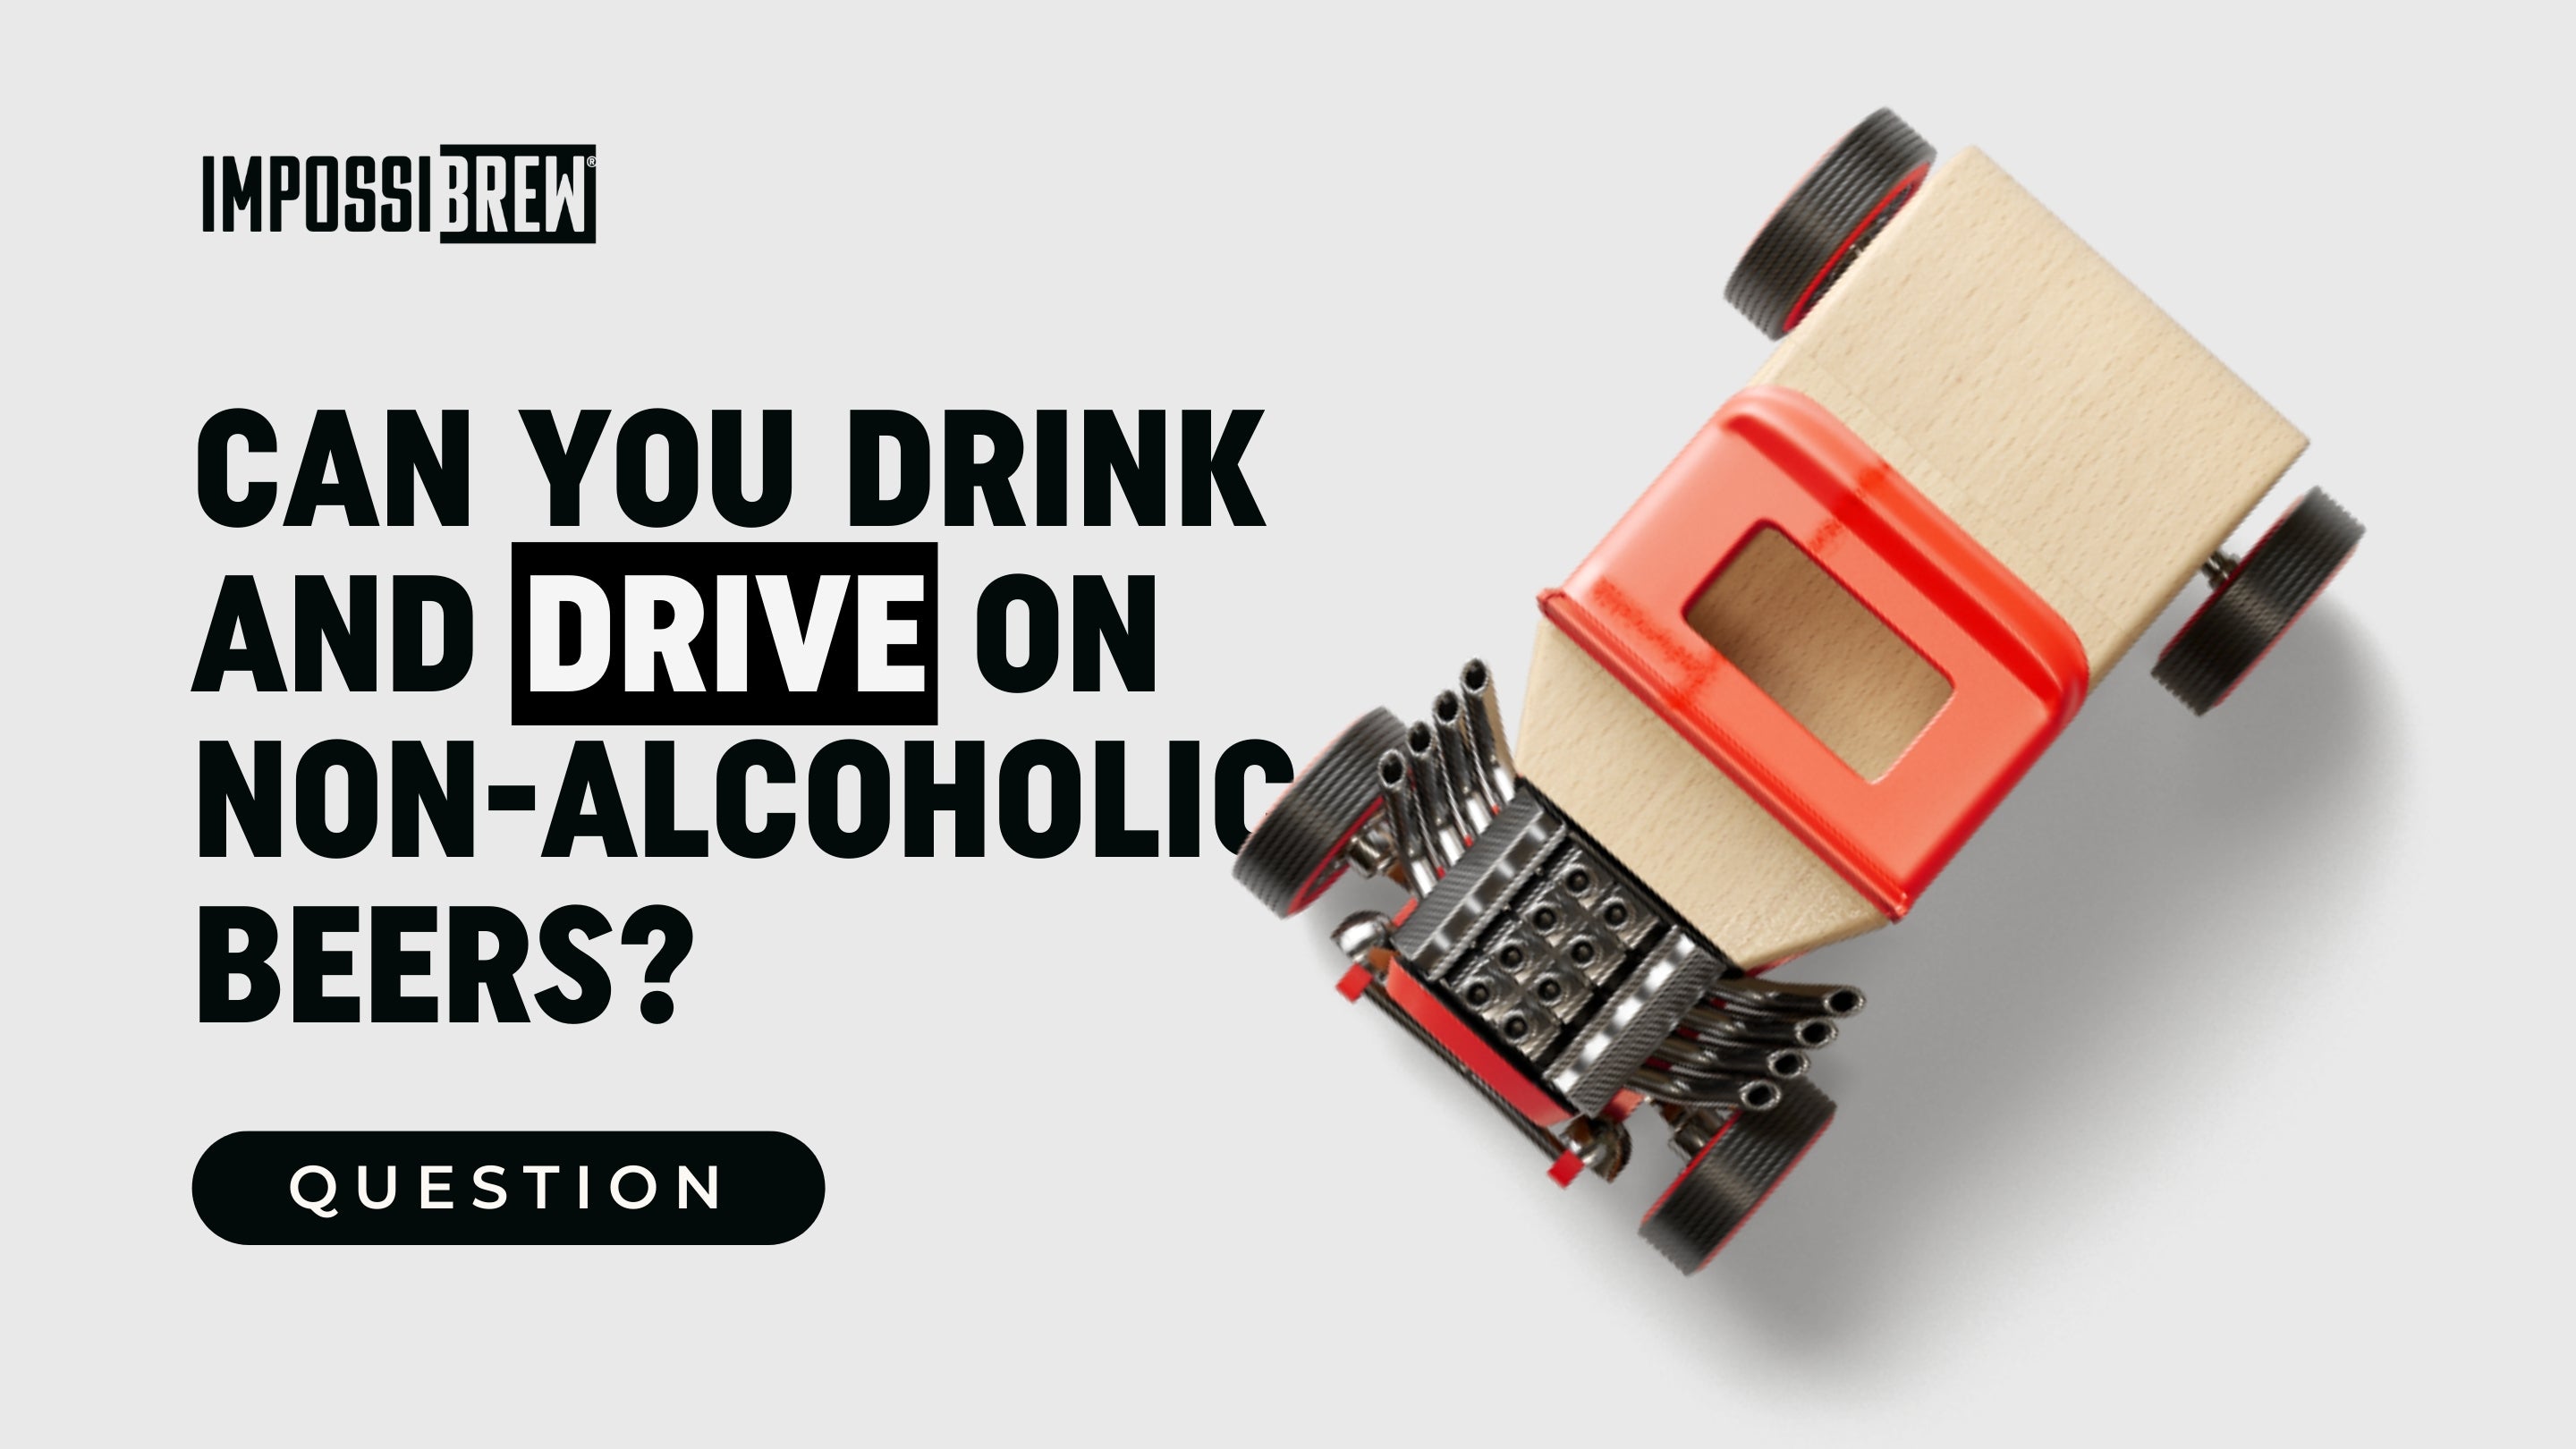 Can You Actually Drink And Drive On NonAlcoholic Beers? IMPOSSIBREW®